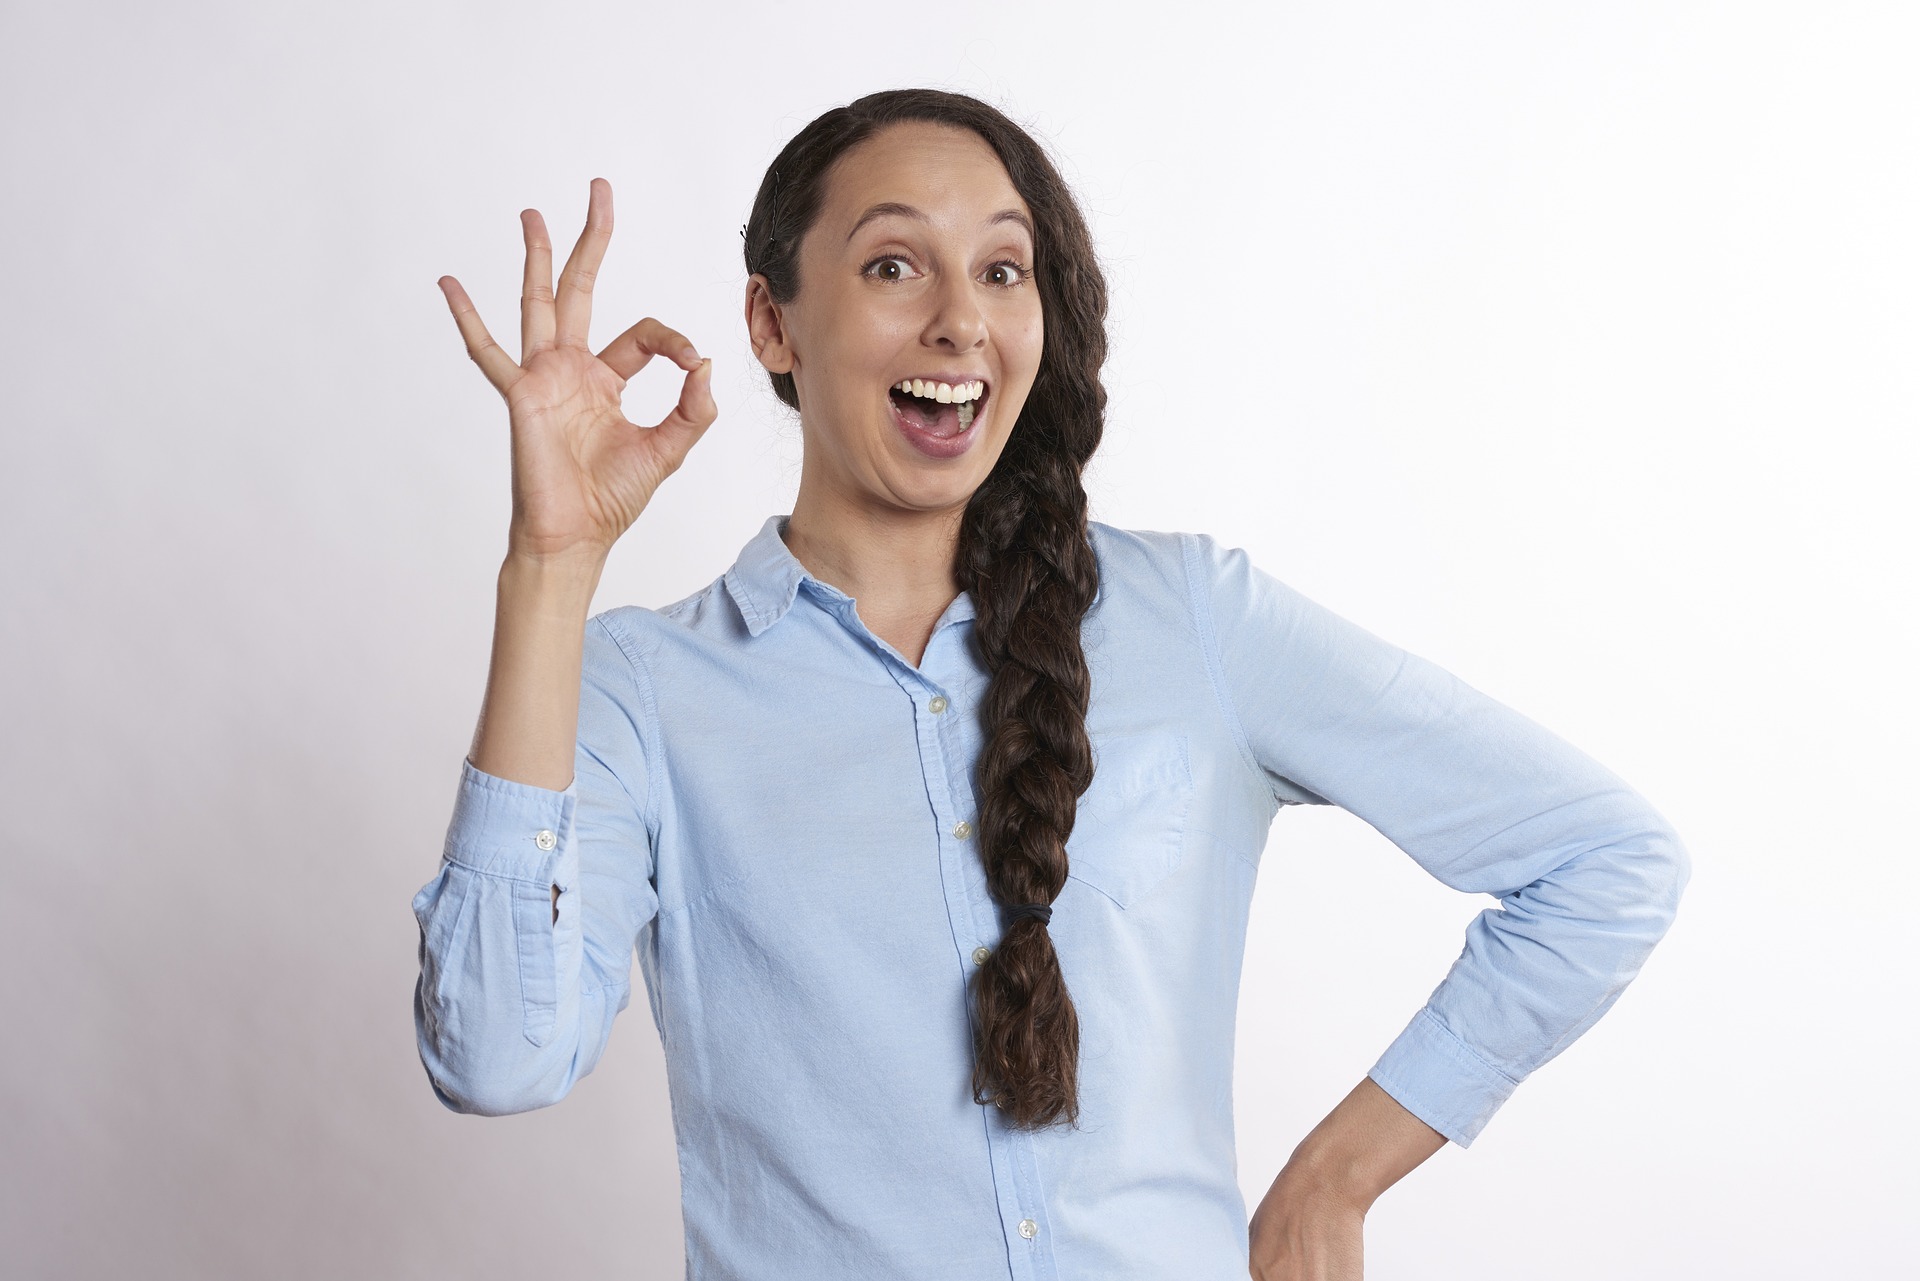 Image of a woman smiling and making an OK sign with her fingers